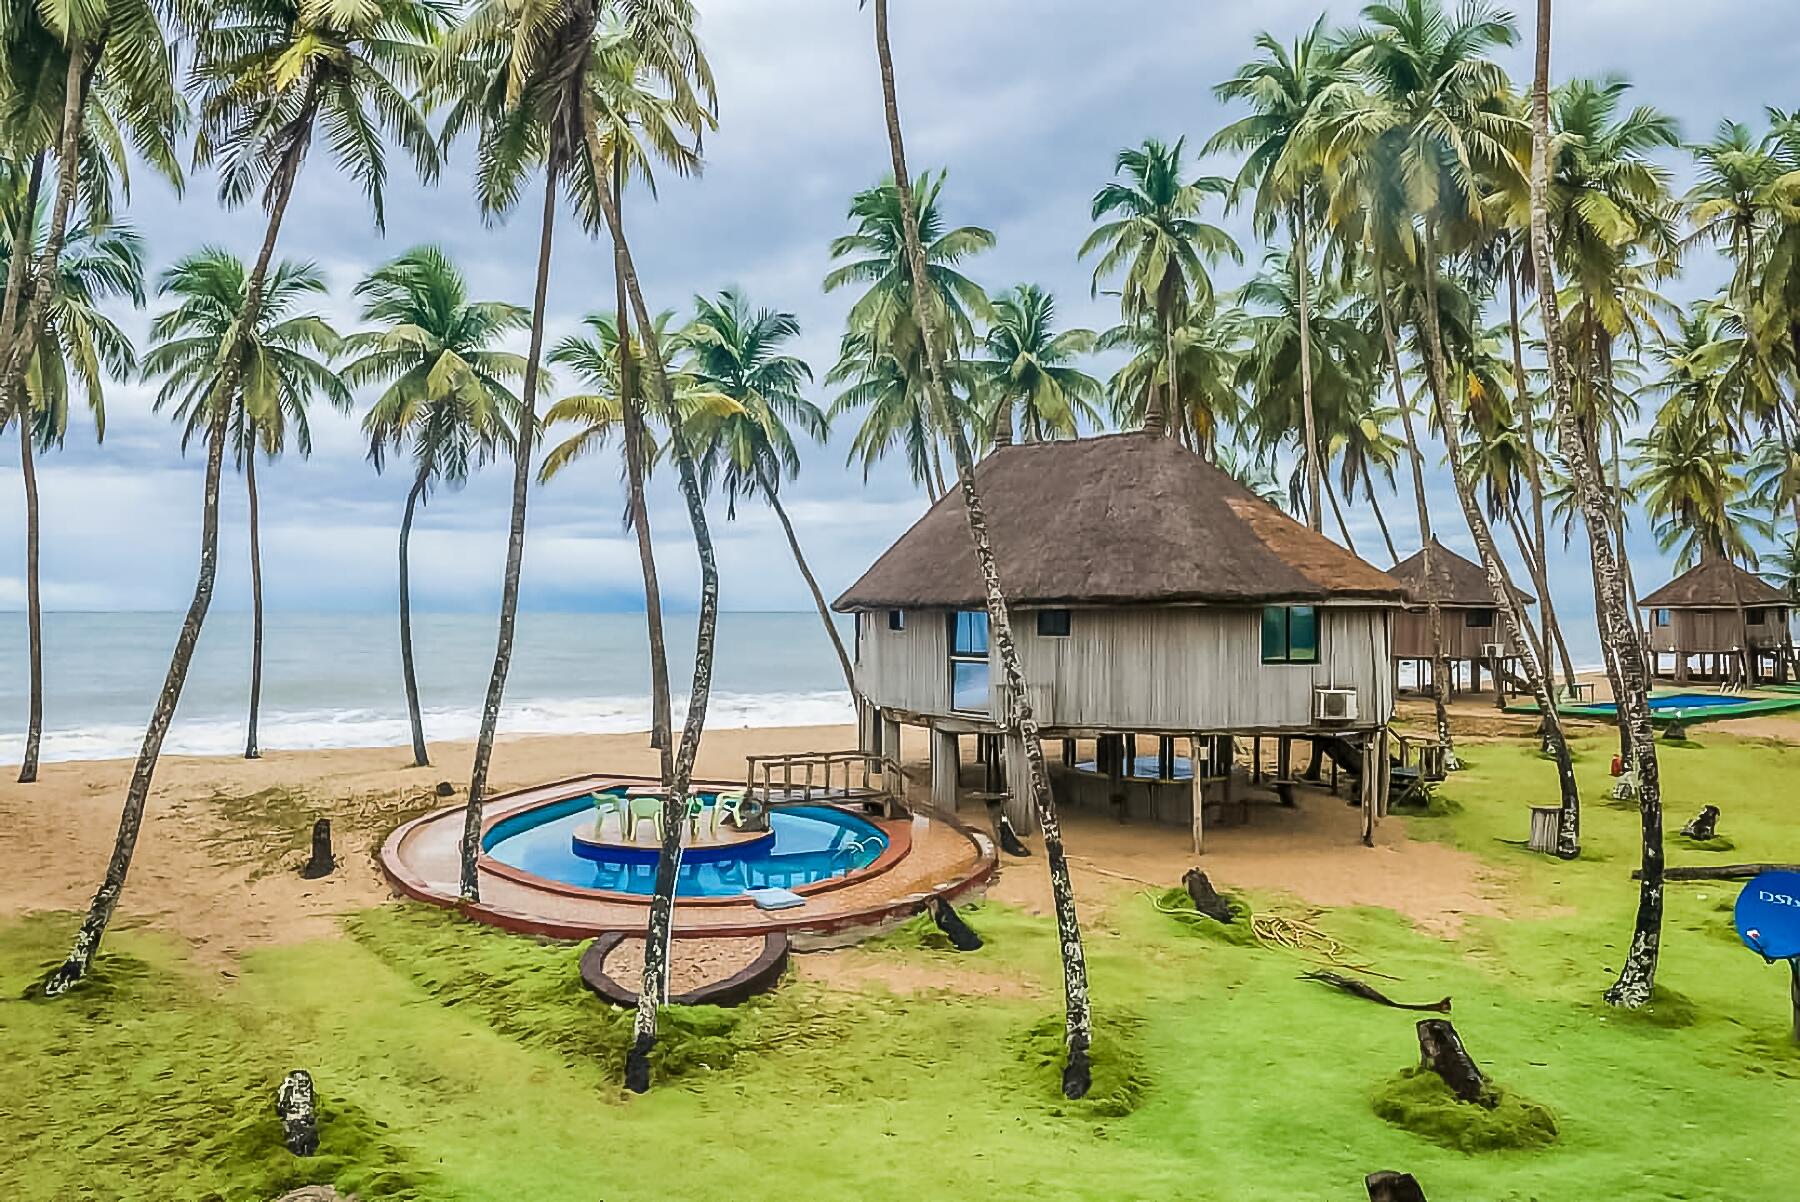 Affordable Vacation Spots in Nigeria 15 Amazing Options to Consider